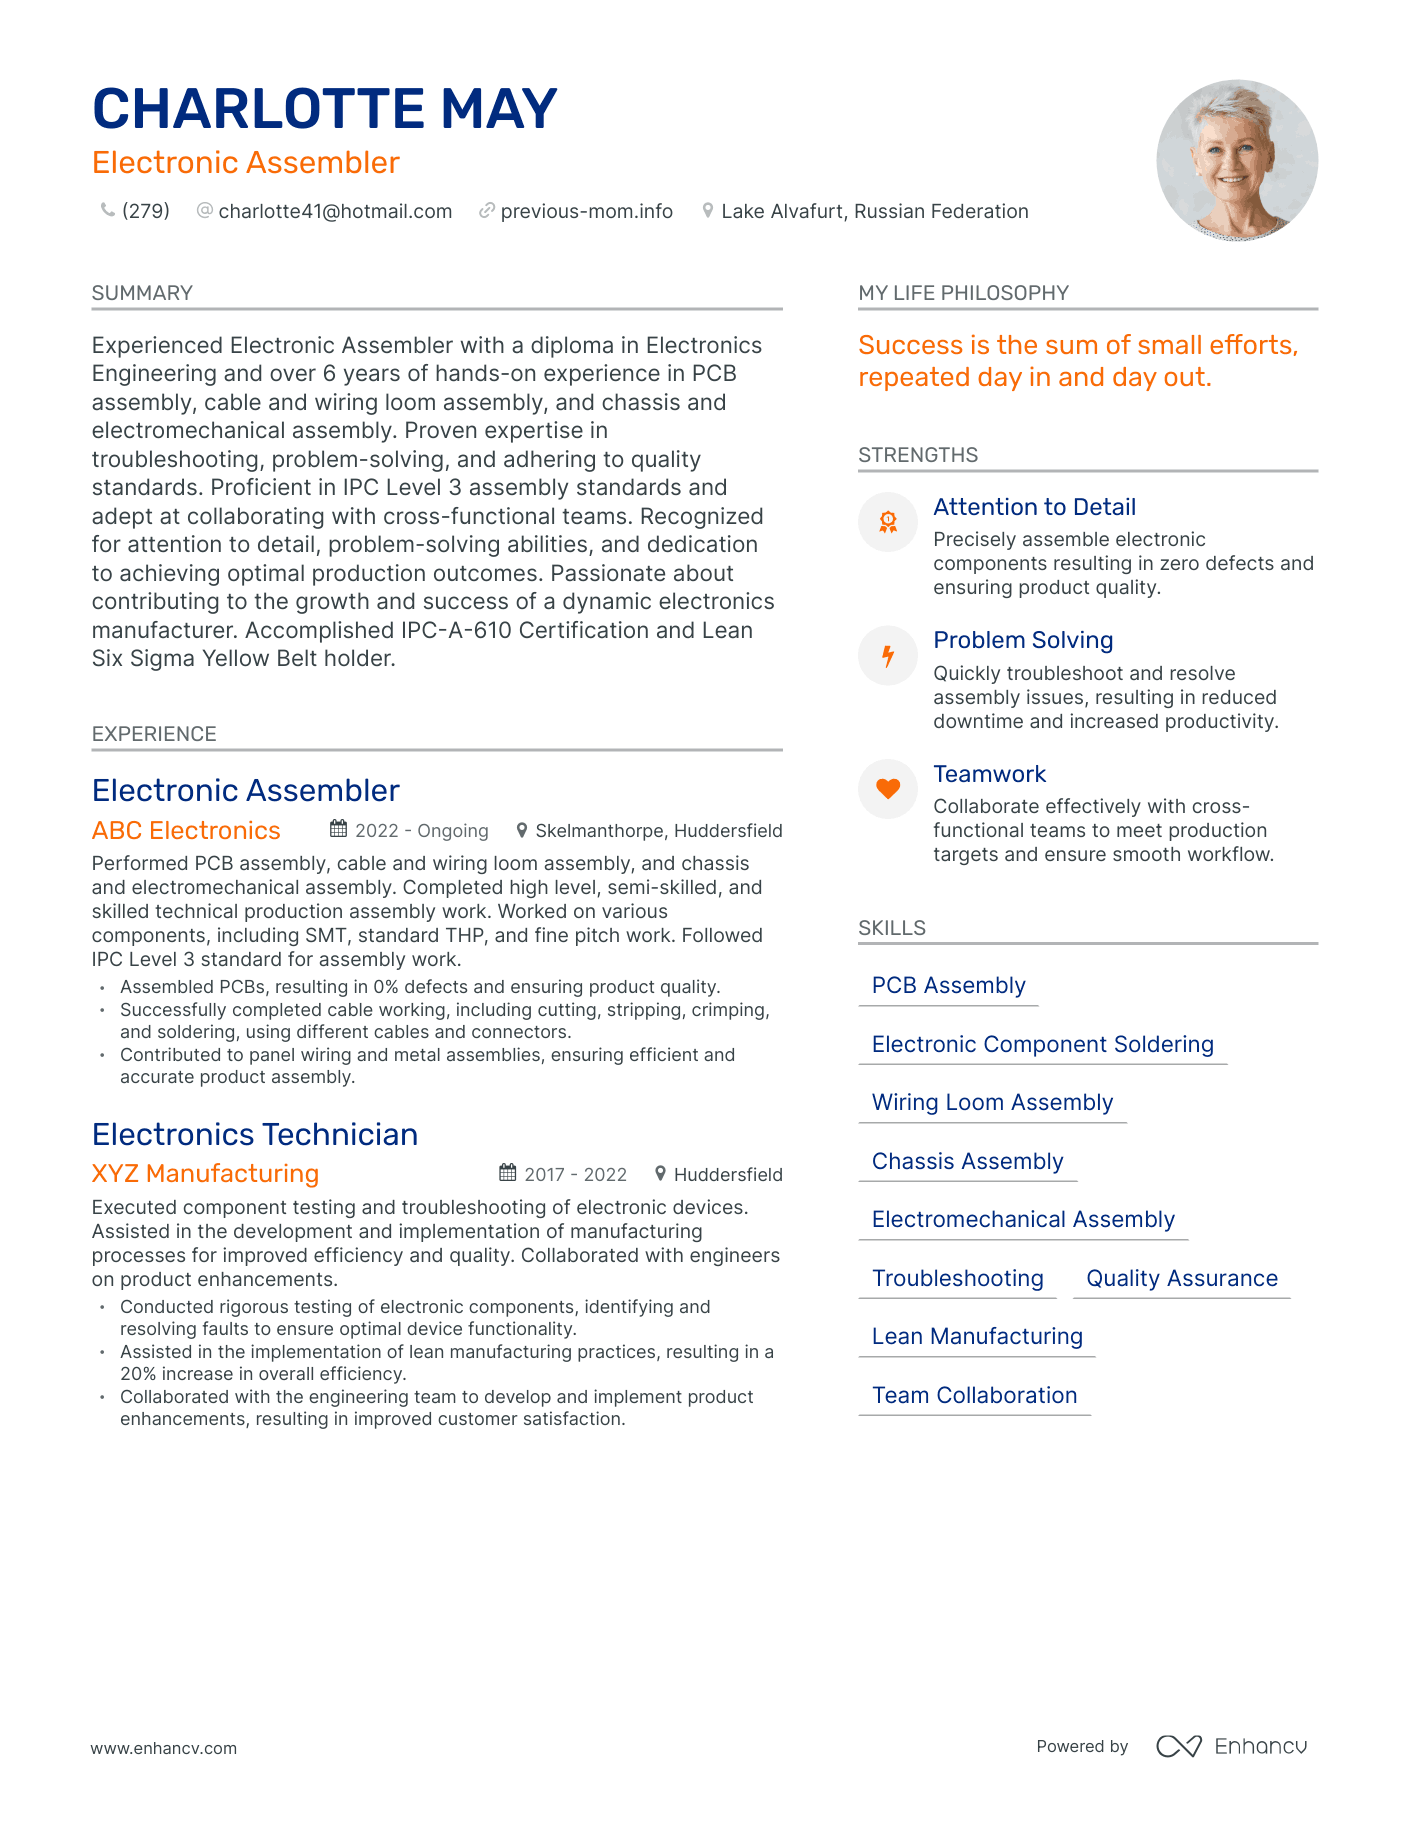 Electronic Assembler resume example